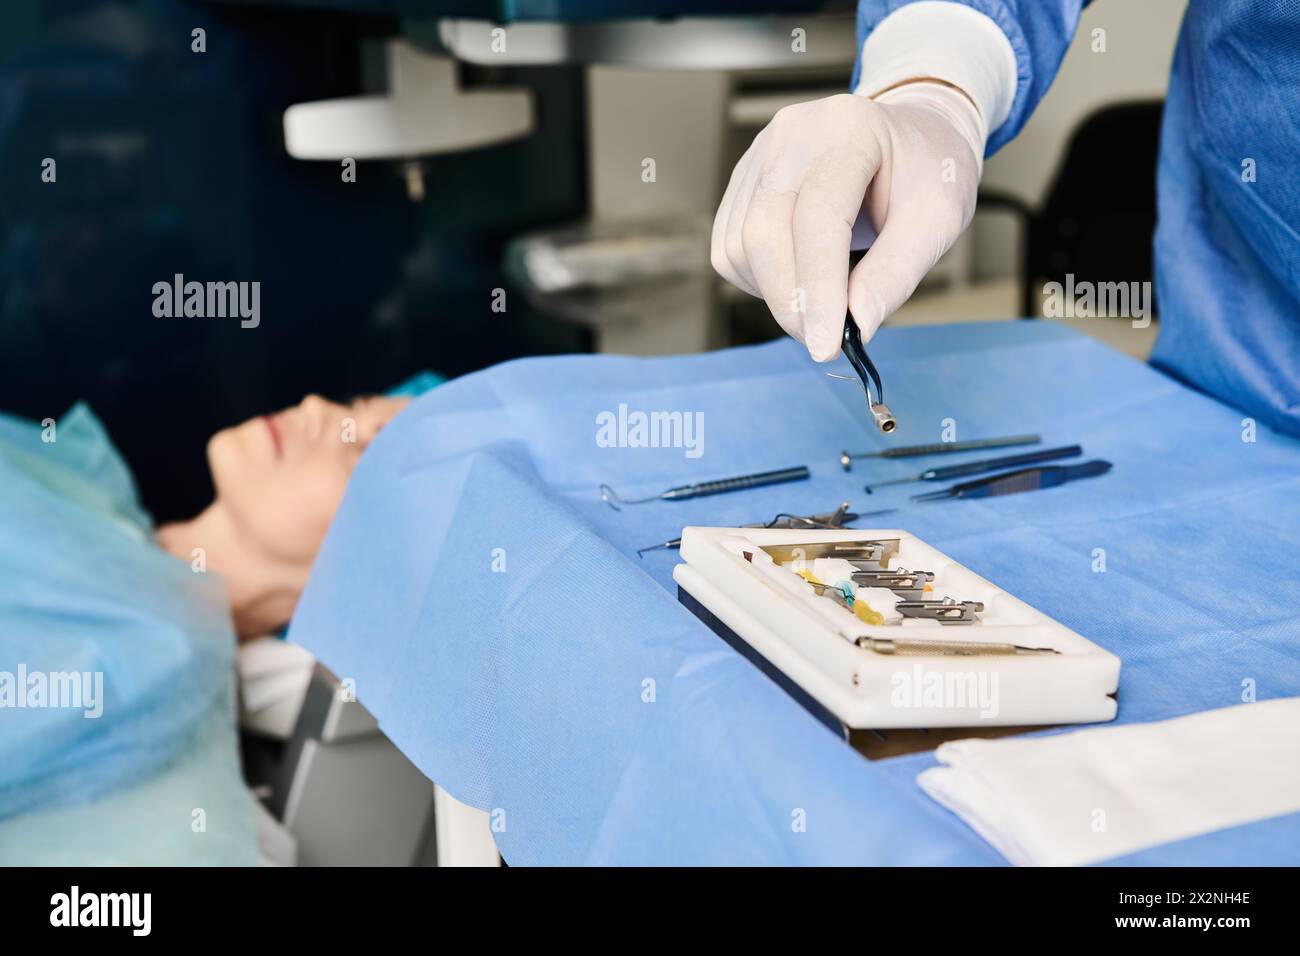 A person in a hospital bed receiving medical attention from healthcare professionals. Stock Photo